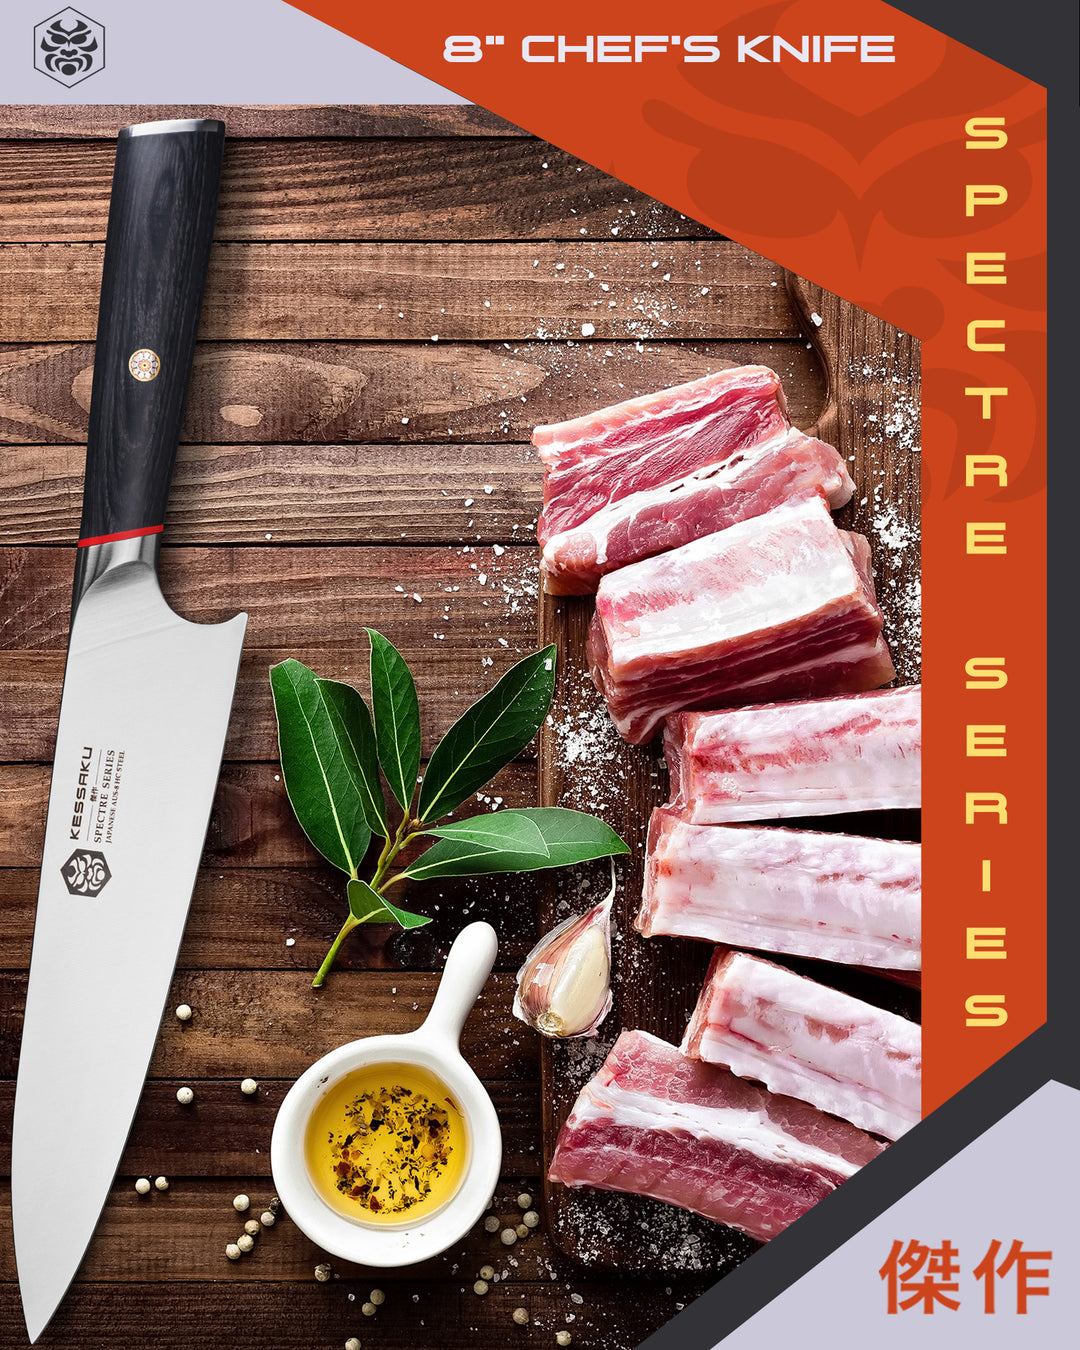 The Spectre Chef's Knife next to seasoned and sliced meat